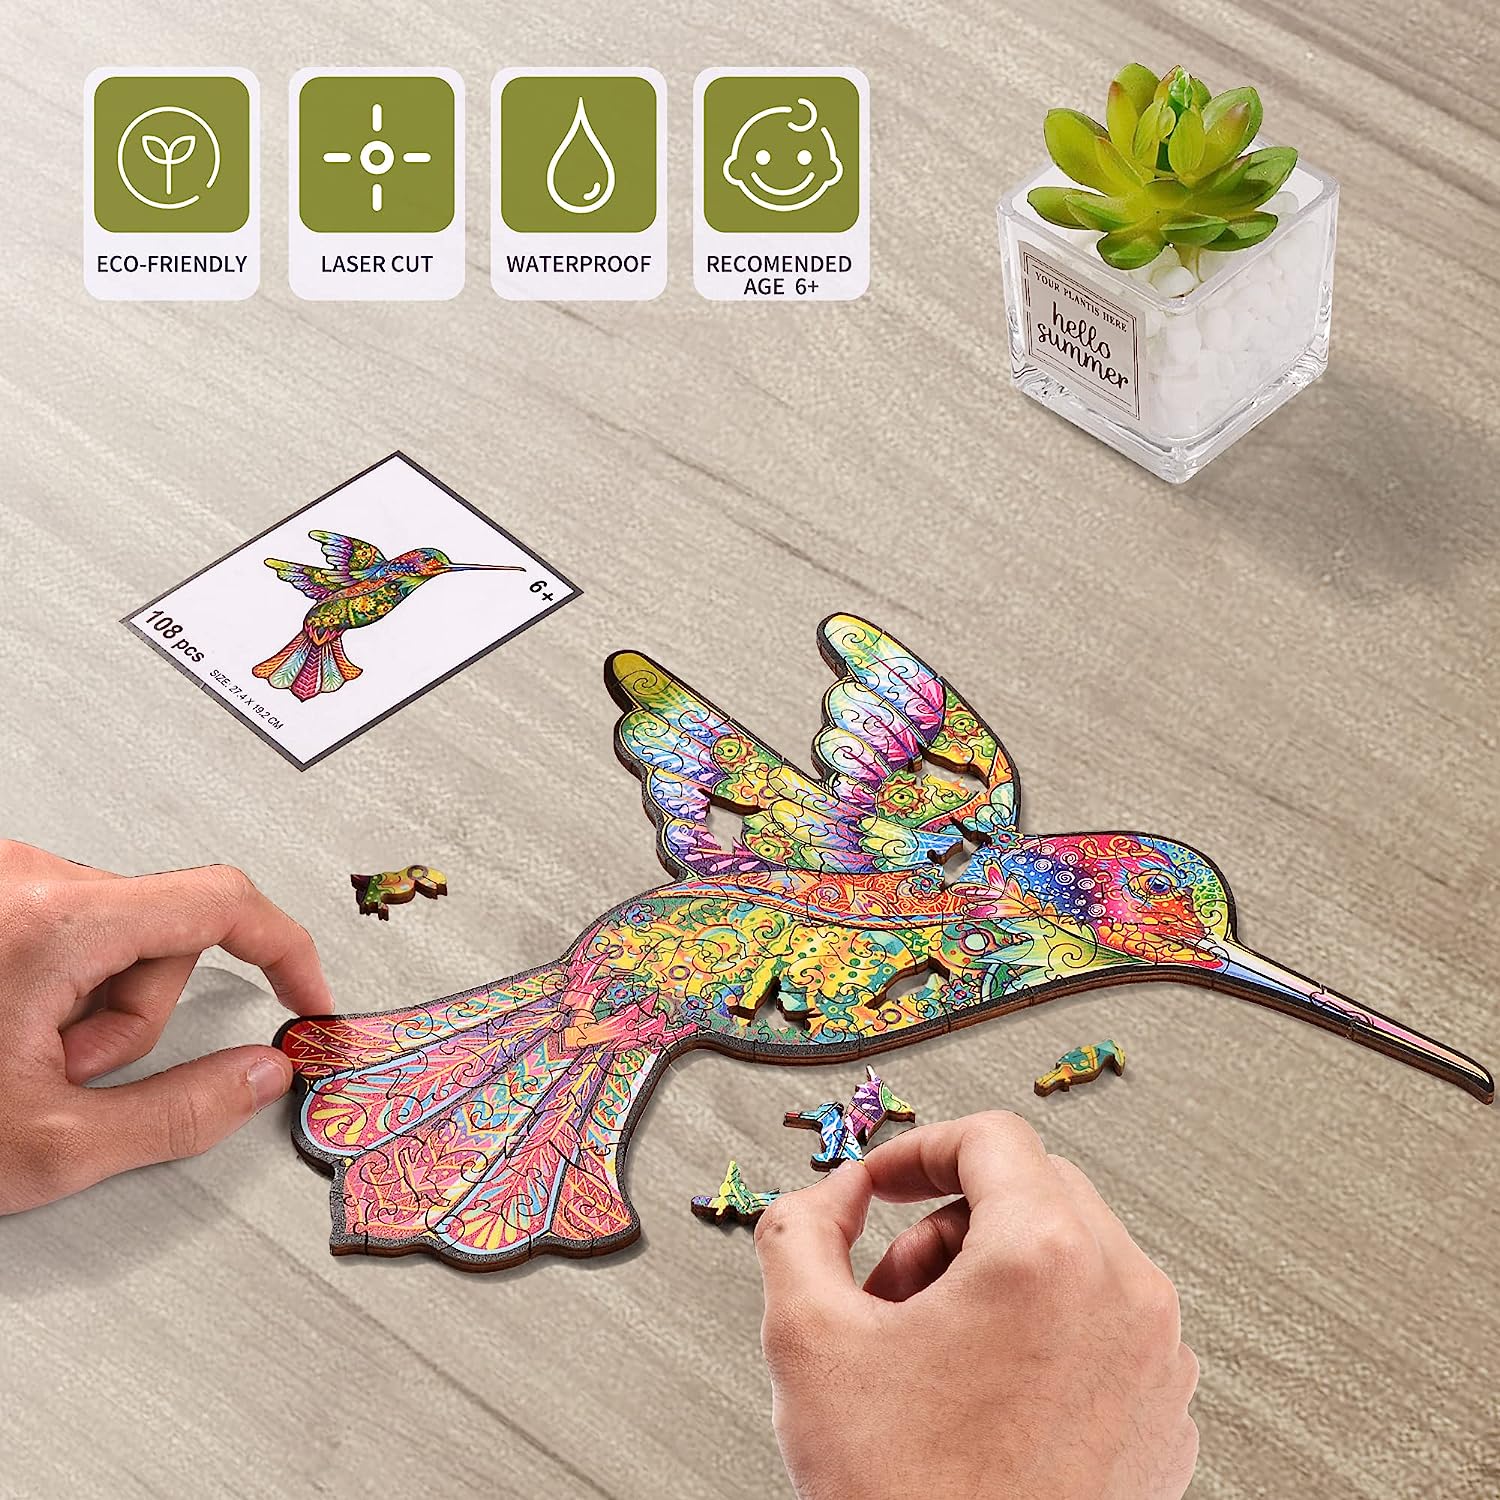 Hummingbird Wooden Puzzle for Adults, 108 PCS Animal Unique Shaped Wooden Jigsaw Puzzles - 7.55 x 10.78 Inches, Creative Gift for Teenagers and Adults